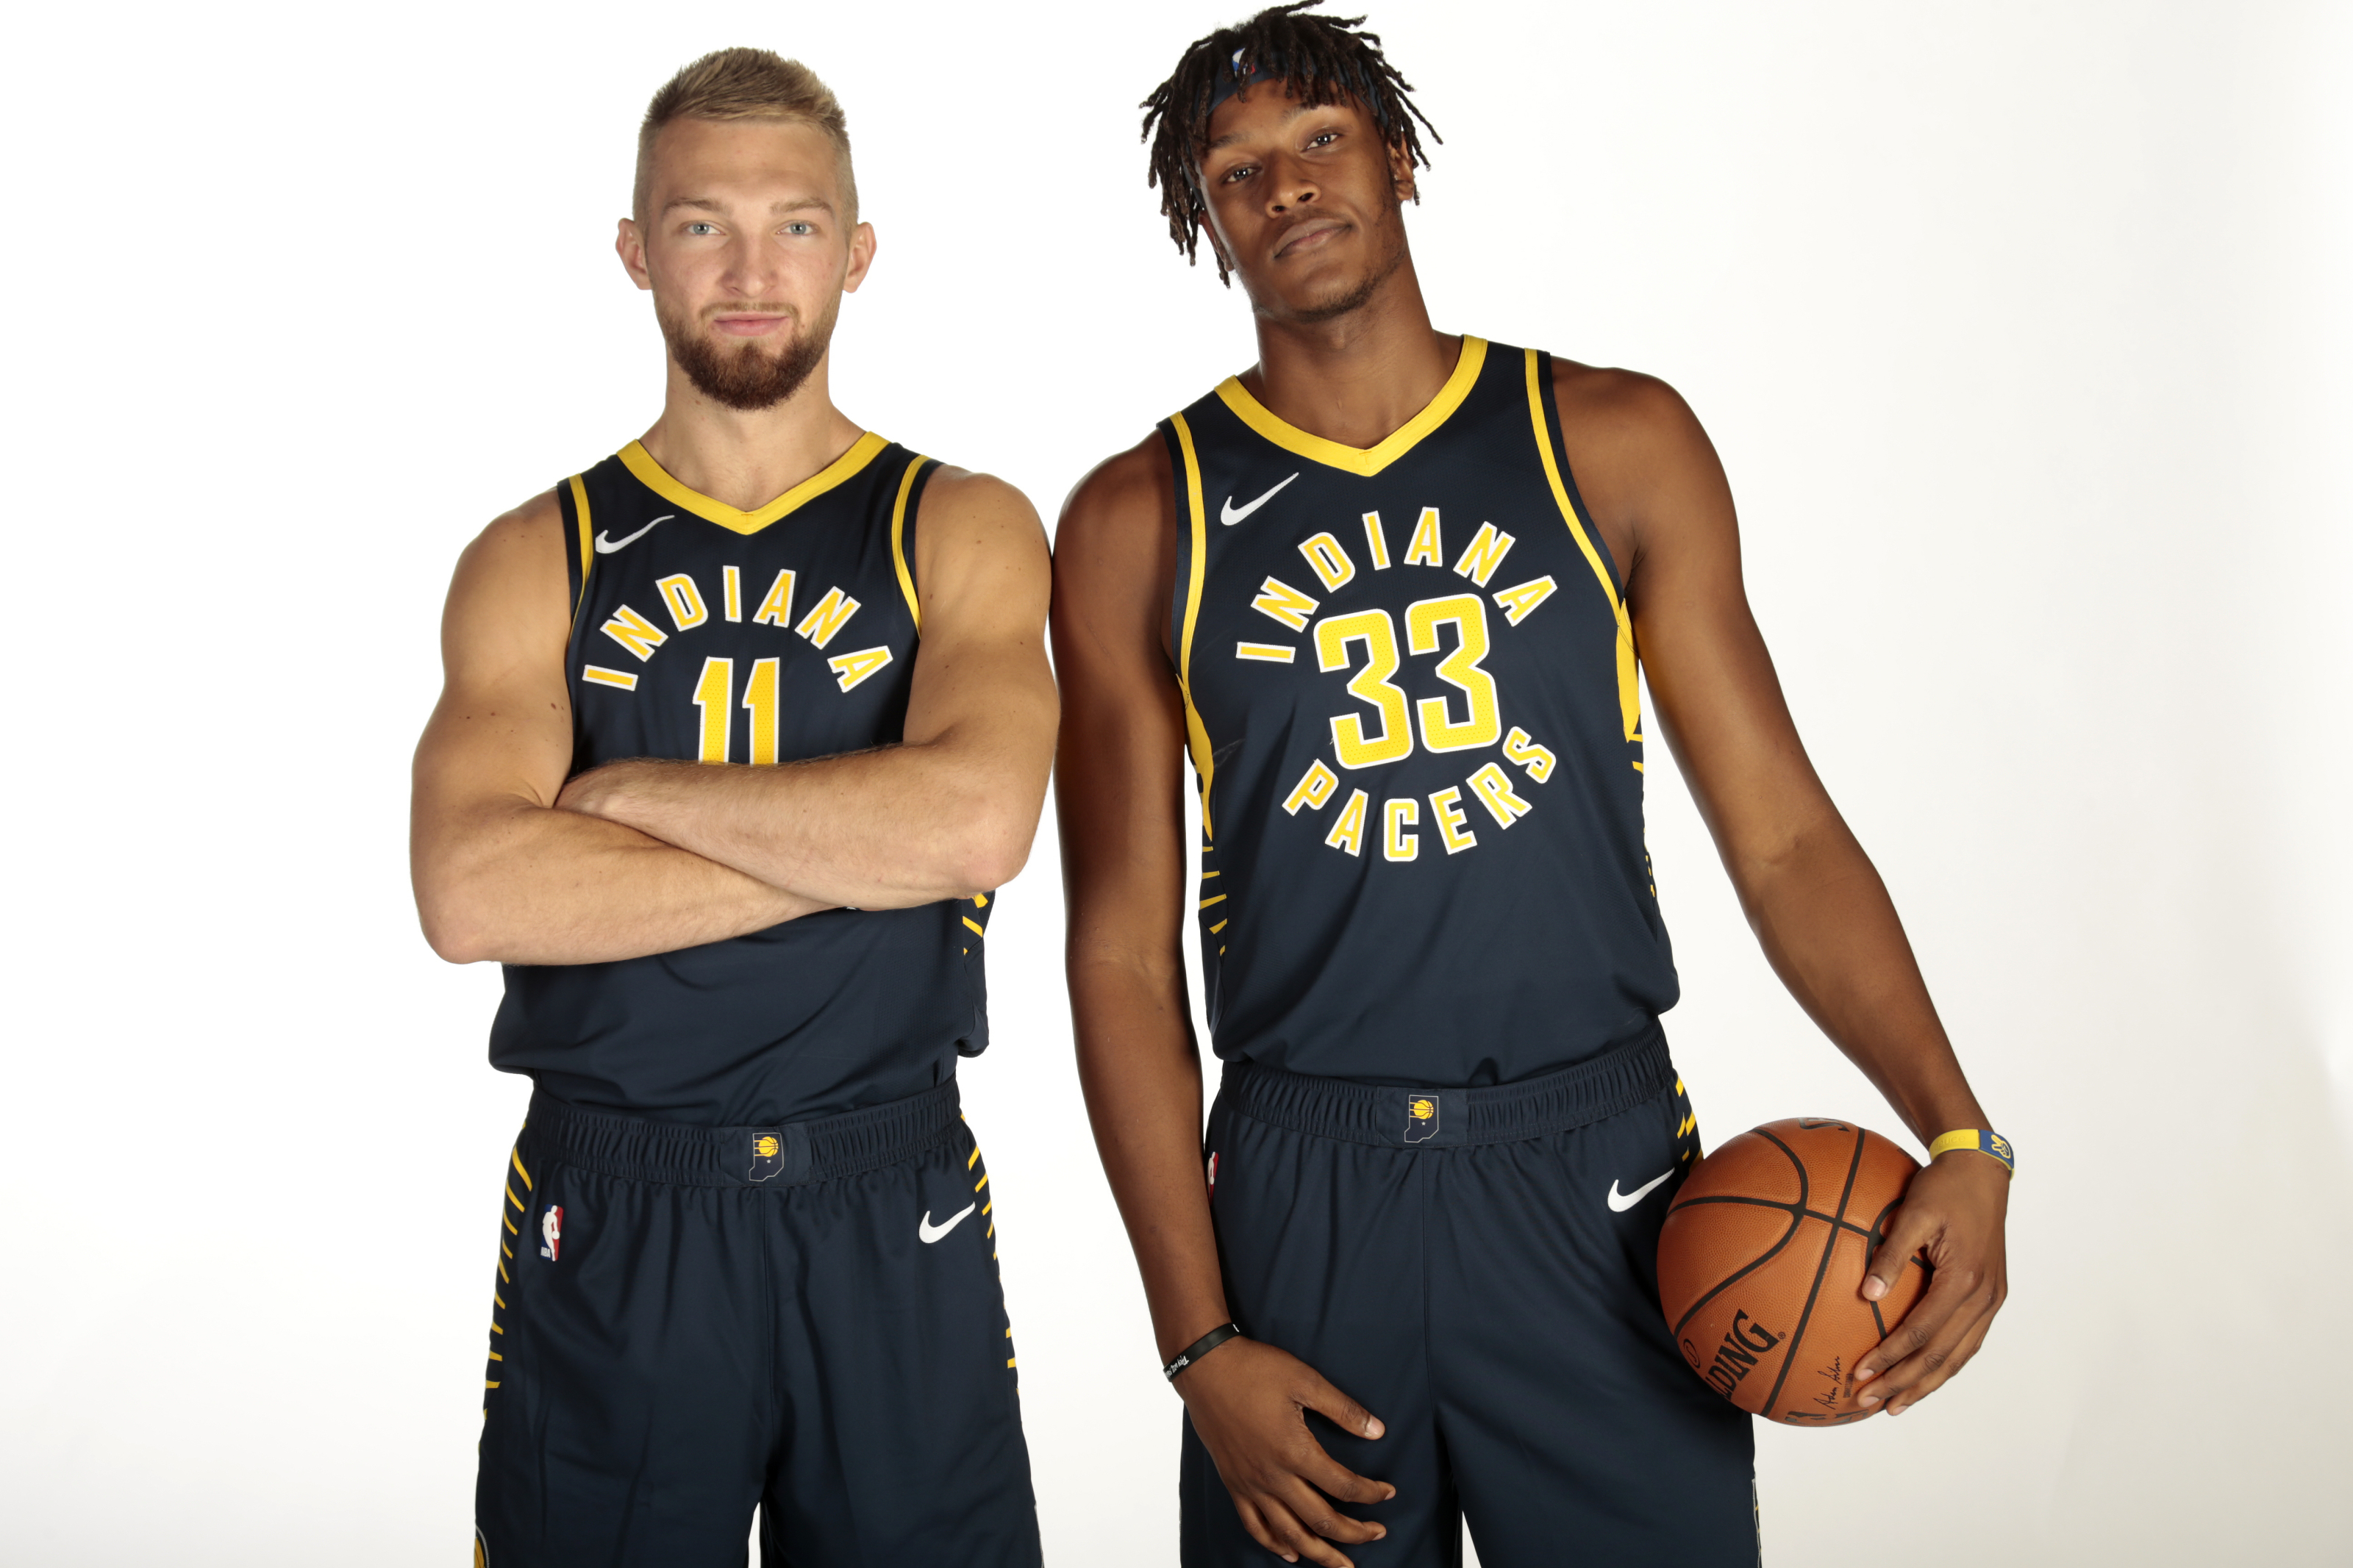 Victor Oladipo, Myles Turner and the 2019-20 Indiana Pacers roster